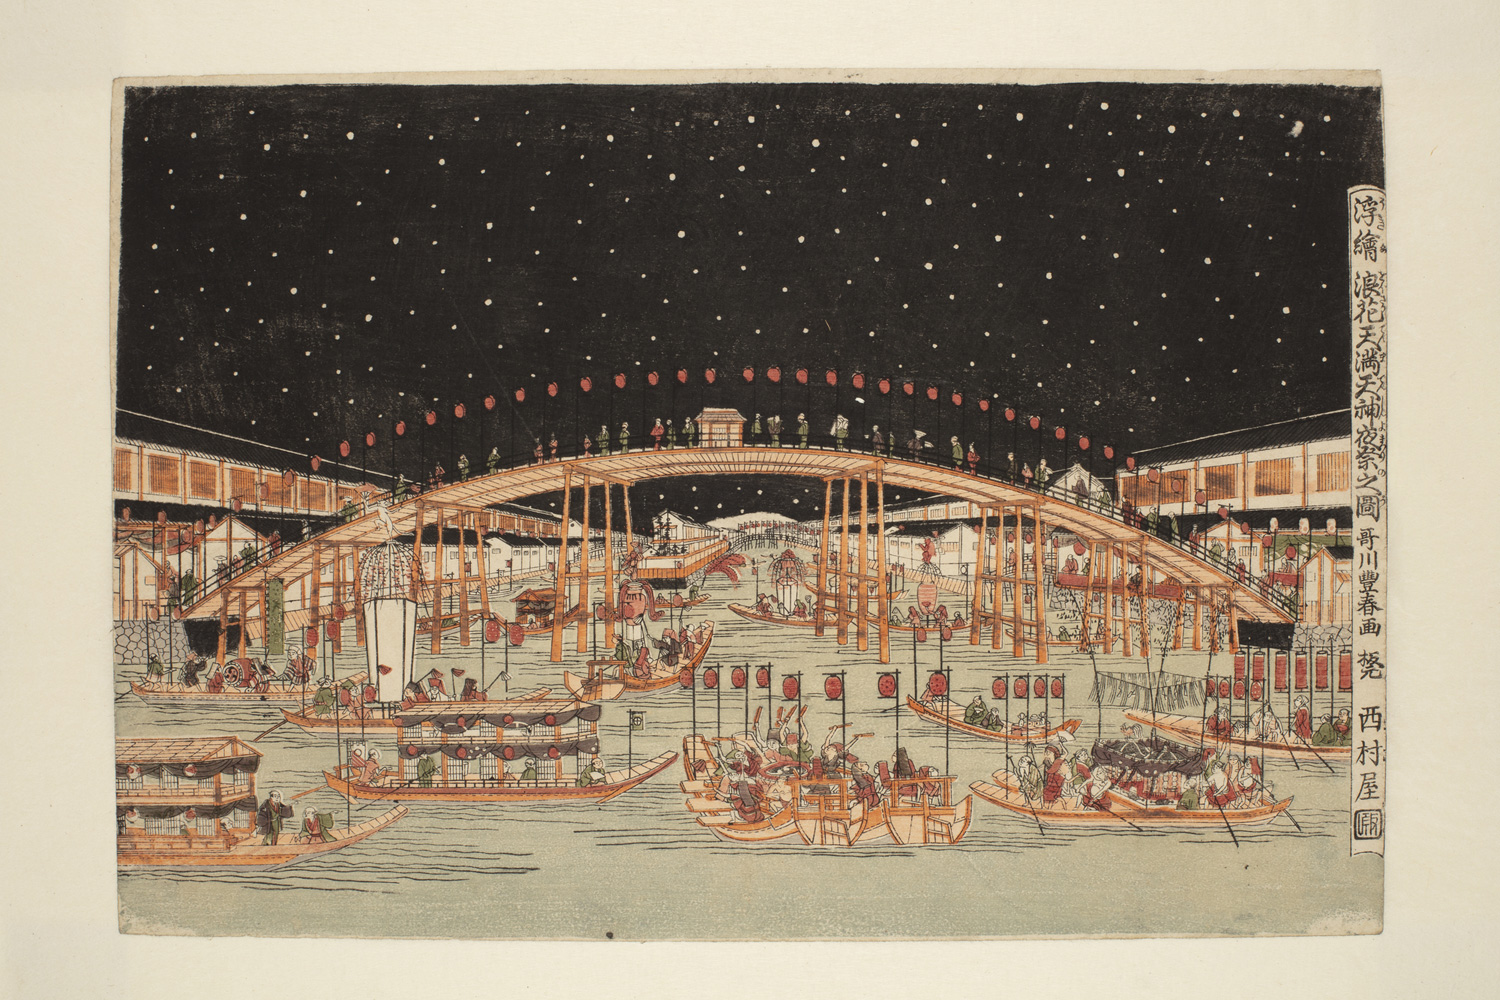 Japanese print of a river scene at night. Many boats are on the river displaying their banners. A bridge arches the river and people are standing on it. Above the sky is full of stars.